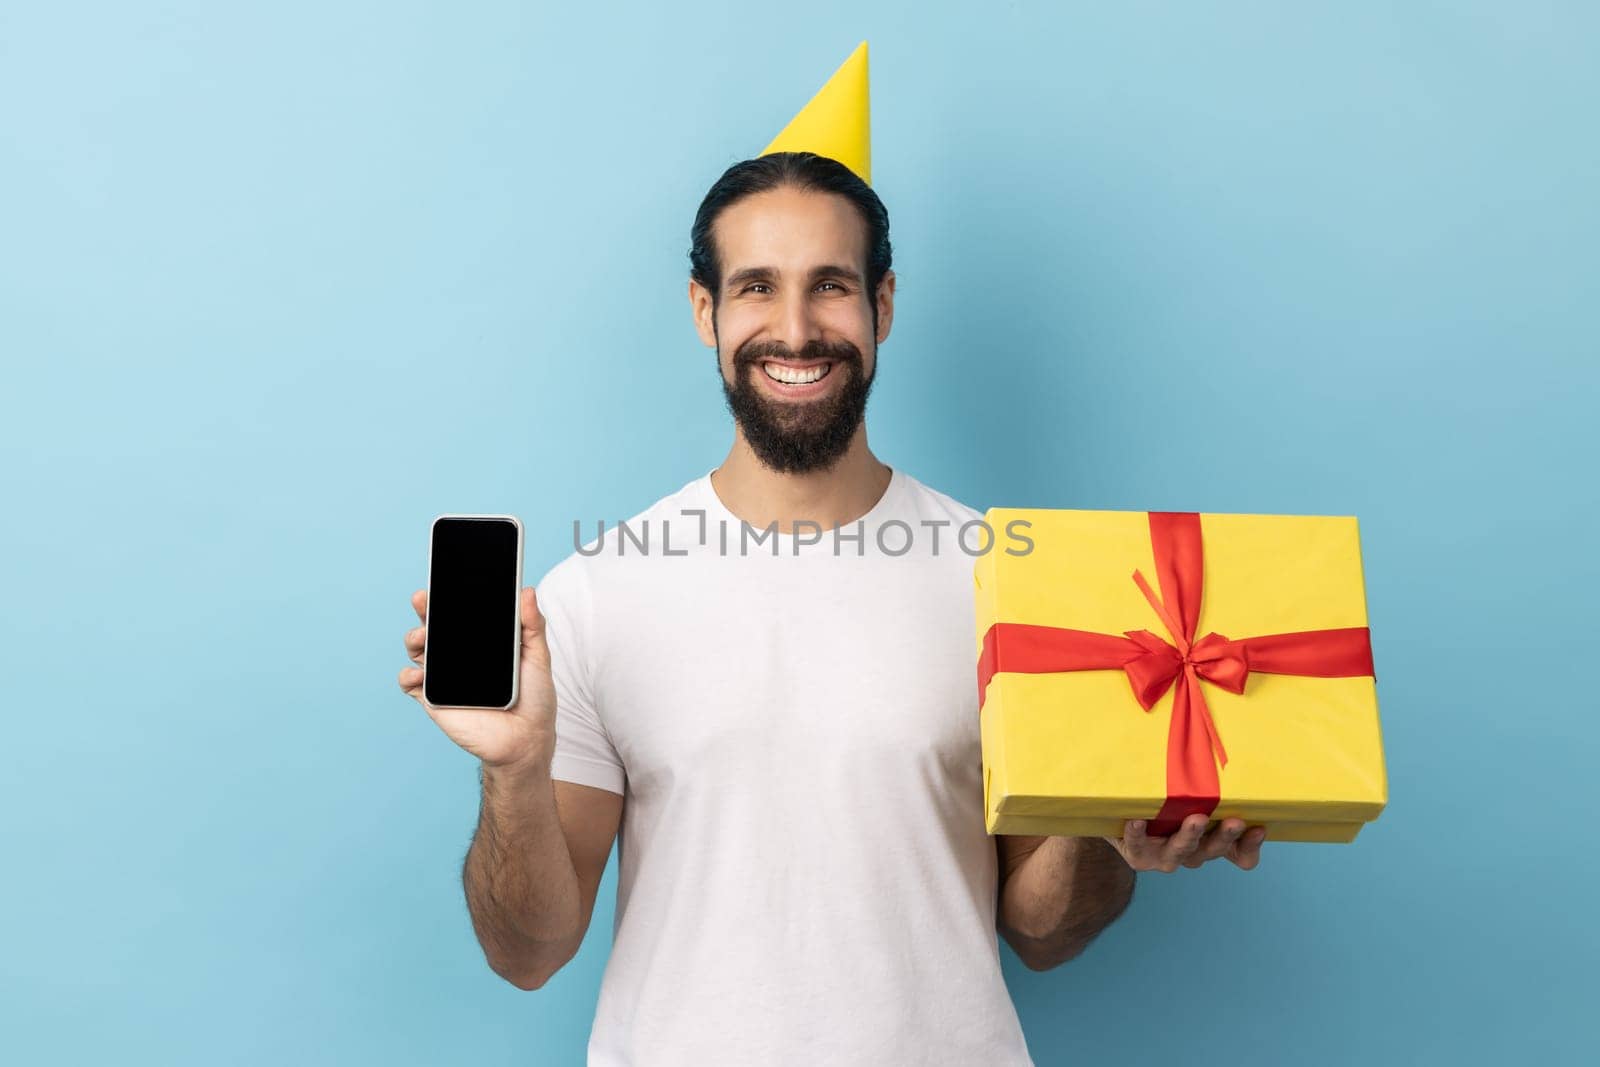 Portrait of man with beard wearing white T-shirt and in party cone holding in hands yellow wrapped present box and smart phone with empty display. Indoor studio shot isolated on blue background.